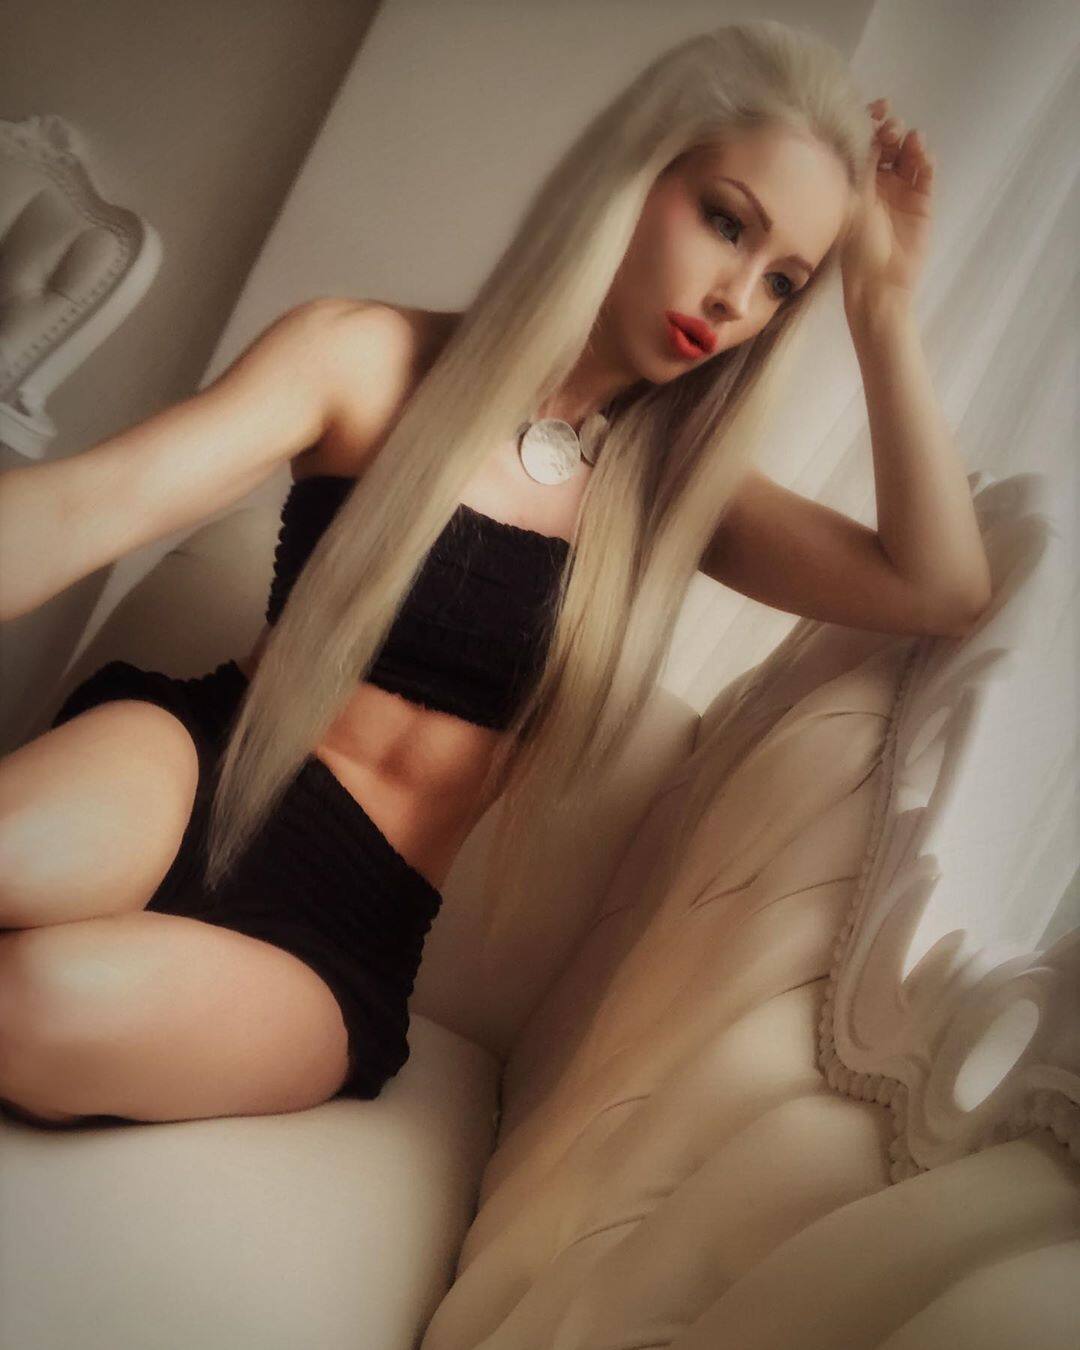 Human Barbie Doll Valeria Lukyanova Before And After